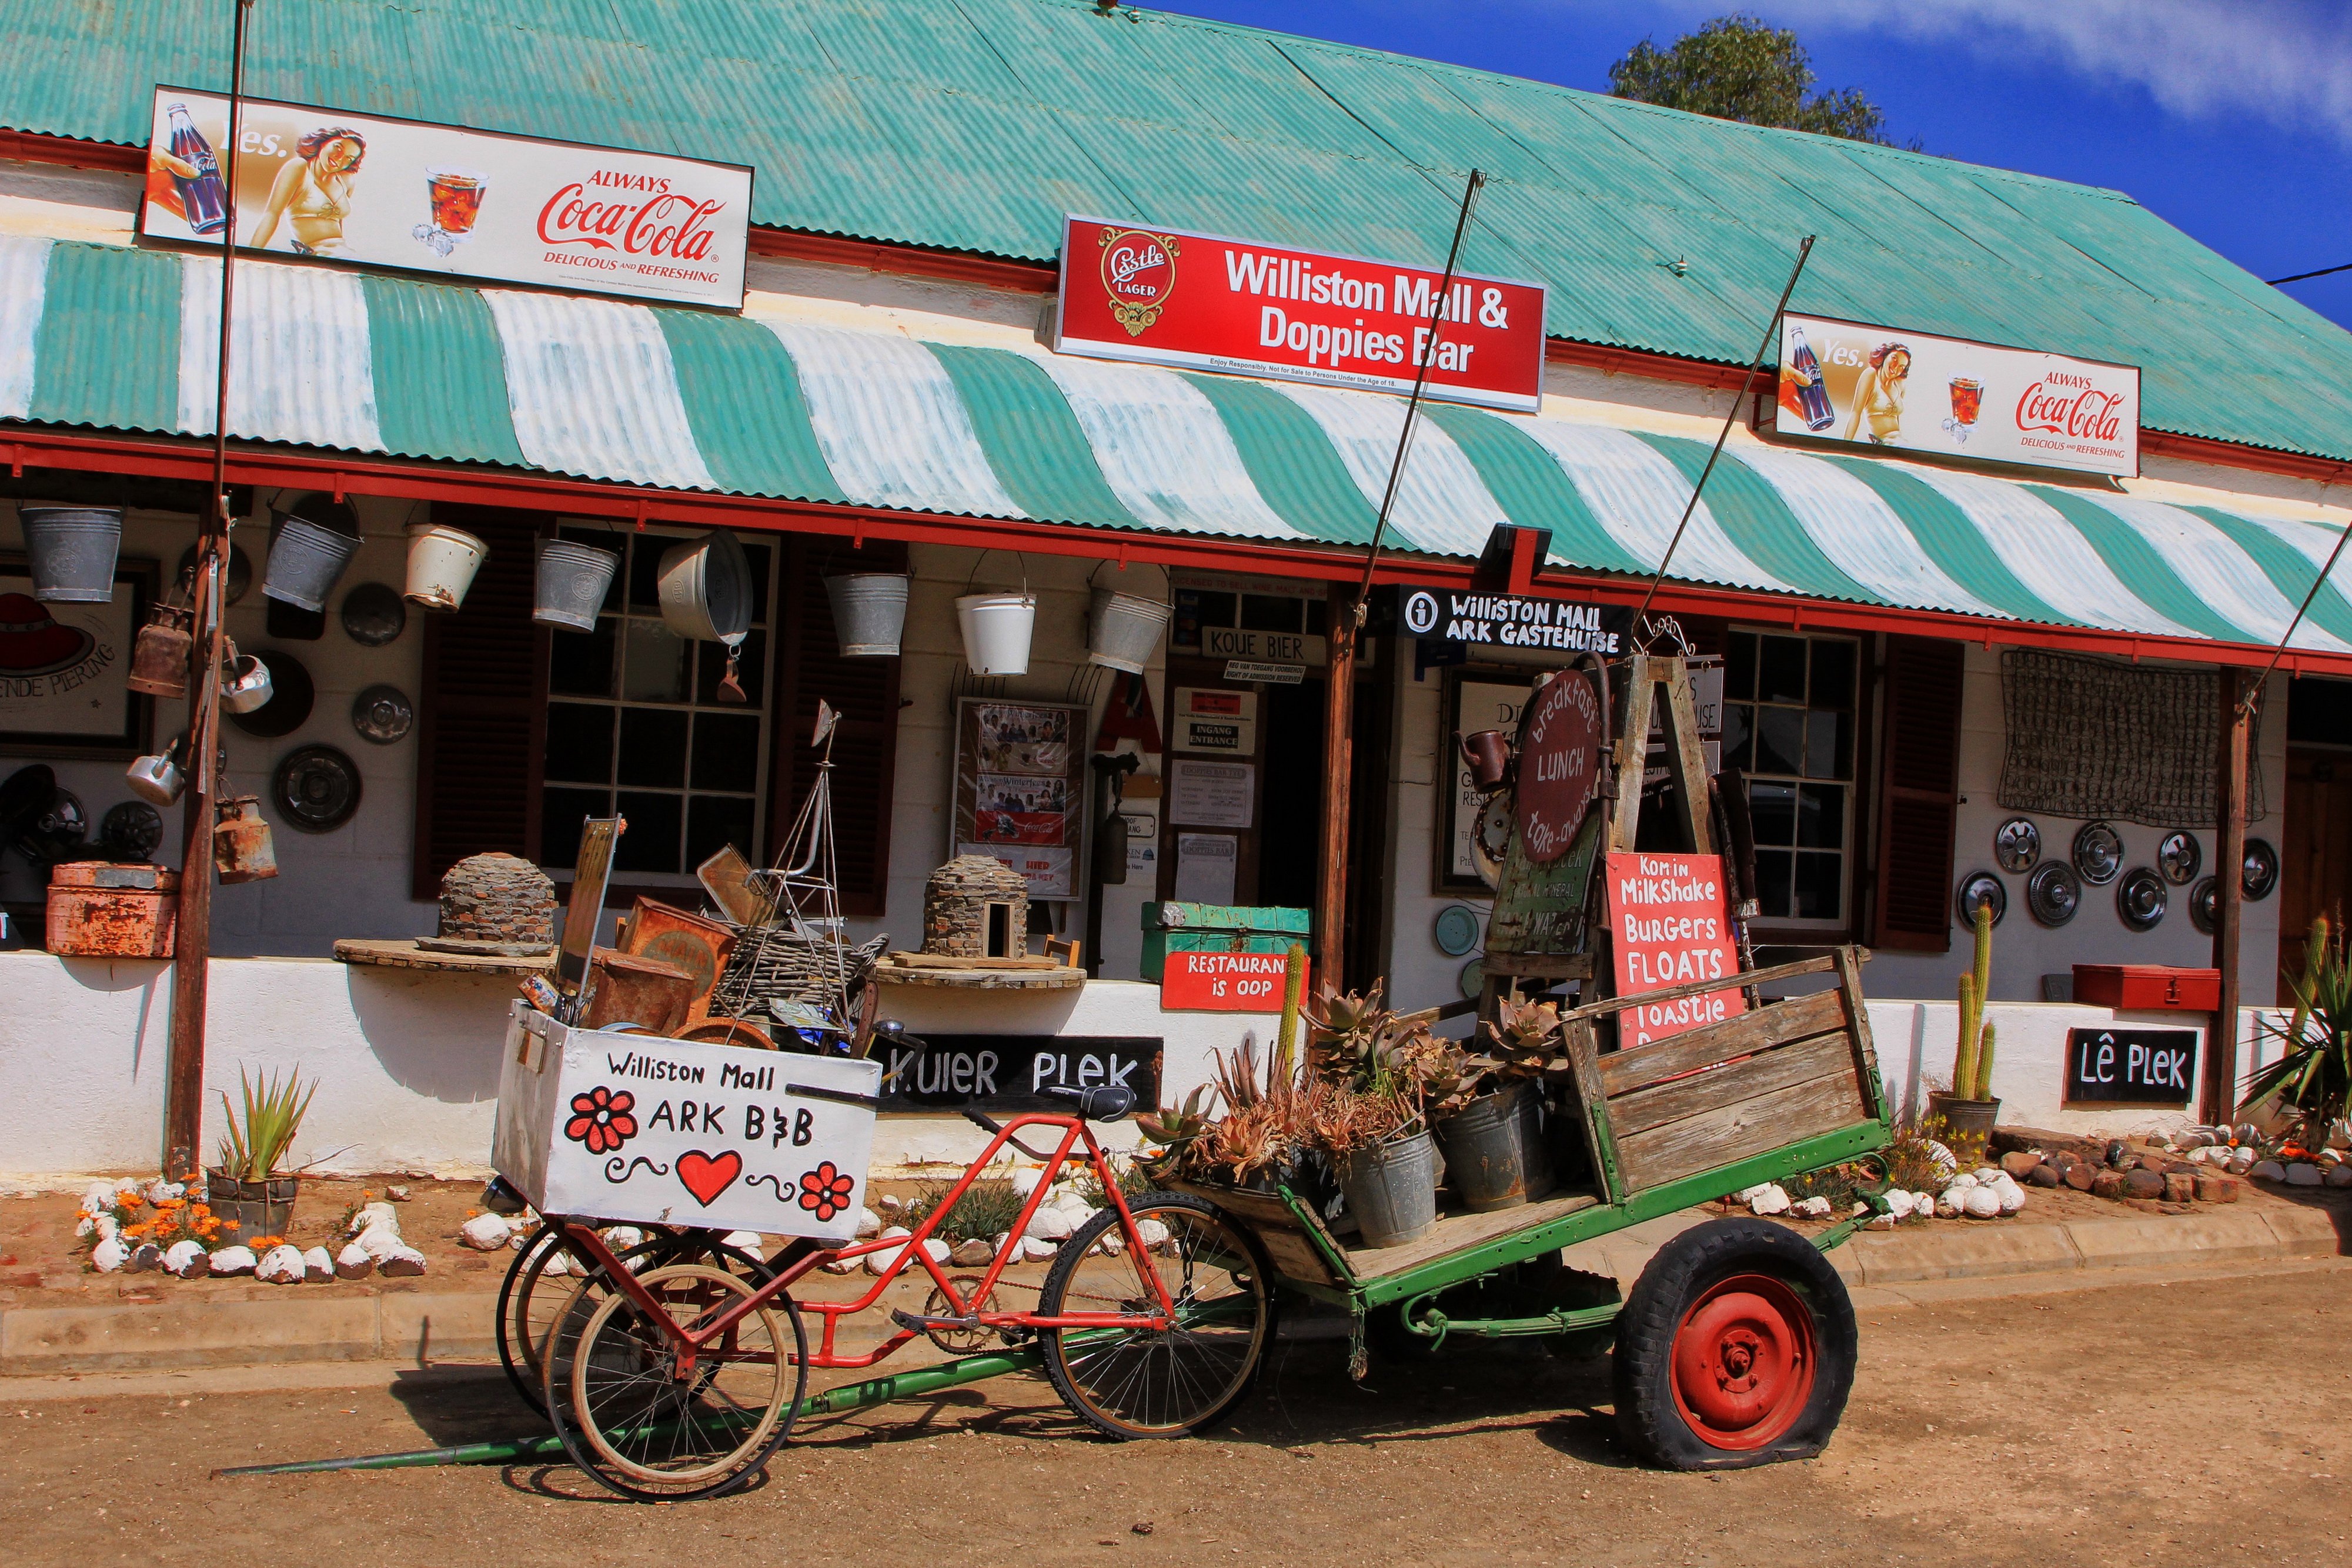 The Williston Mall – a firm fixture on Karoo road trippers’ itineraries. Image: Chris Marais